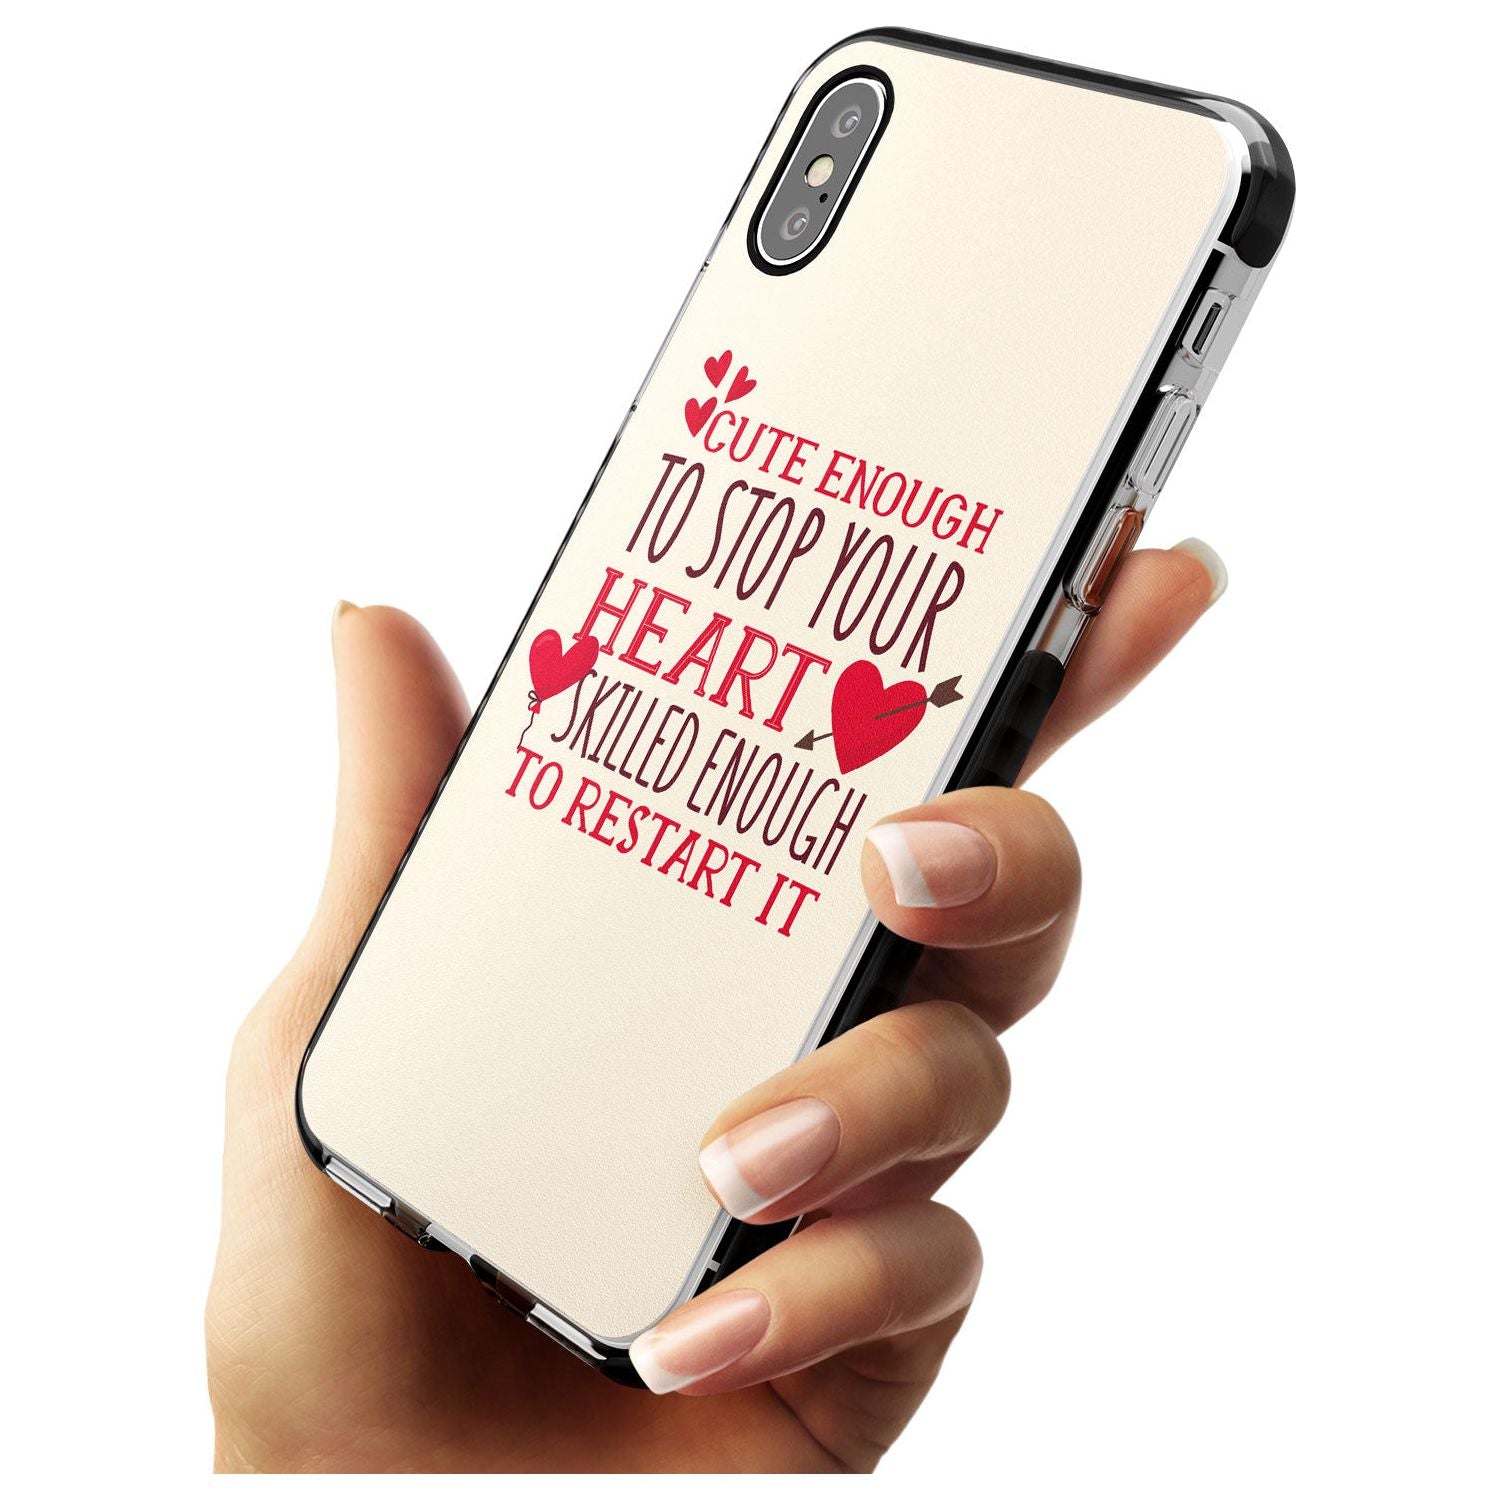 Medical Design Cute Enough to Stop Your Heart Black Impact Phone Case for iPhone X XS Max XR